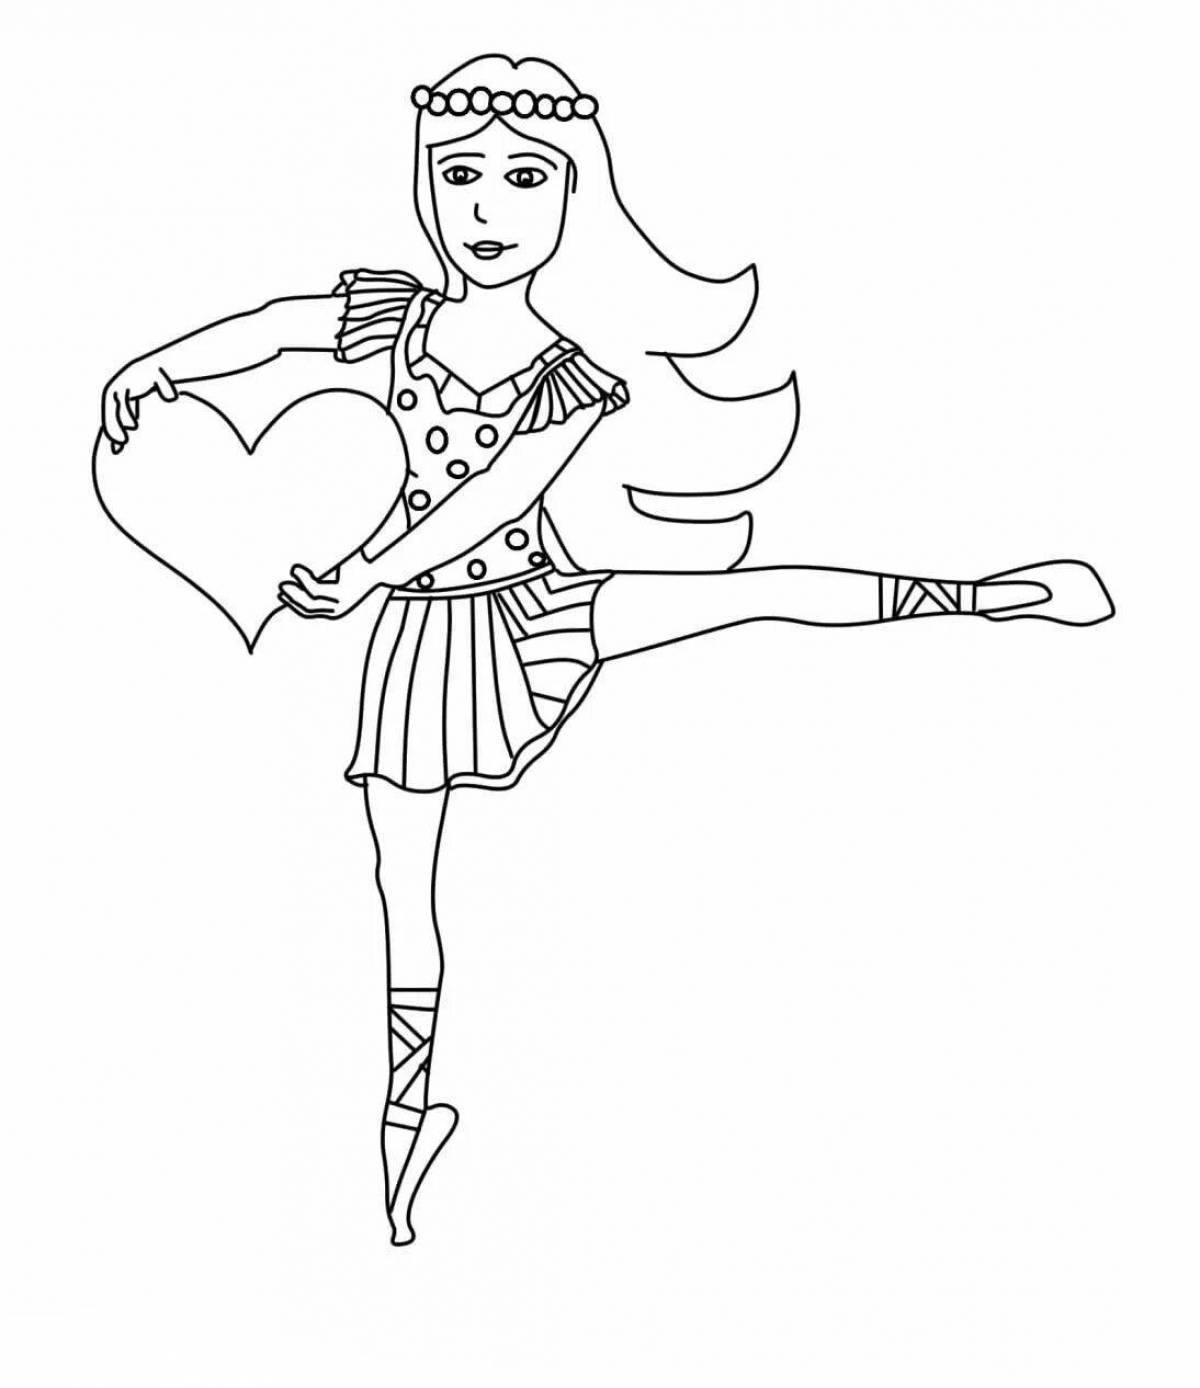 Coloring page dazzling ballerina